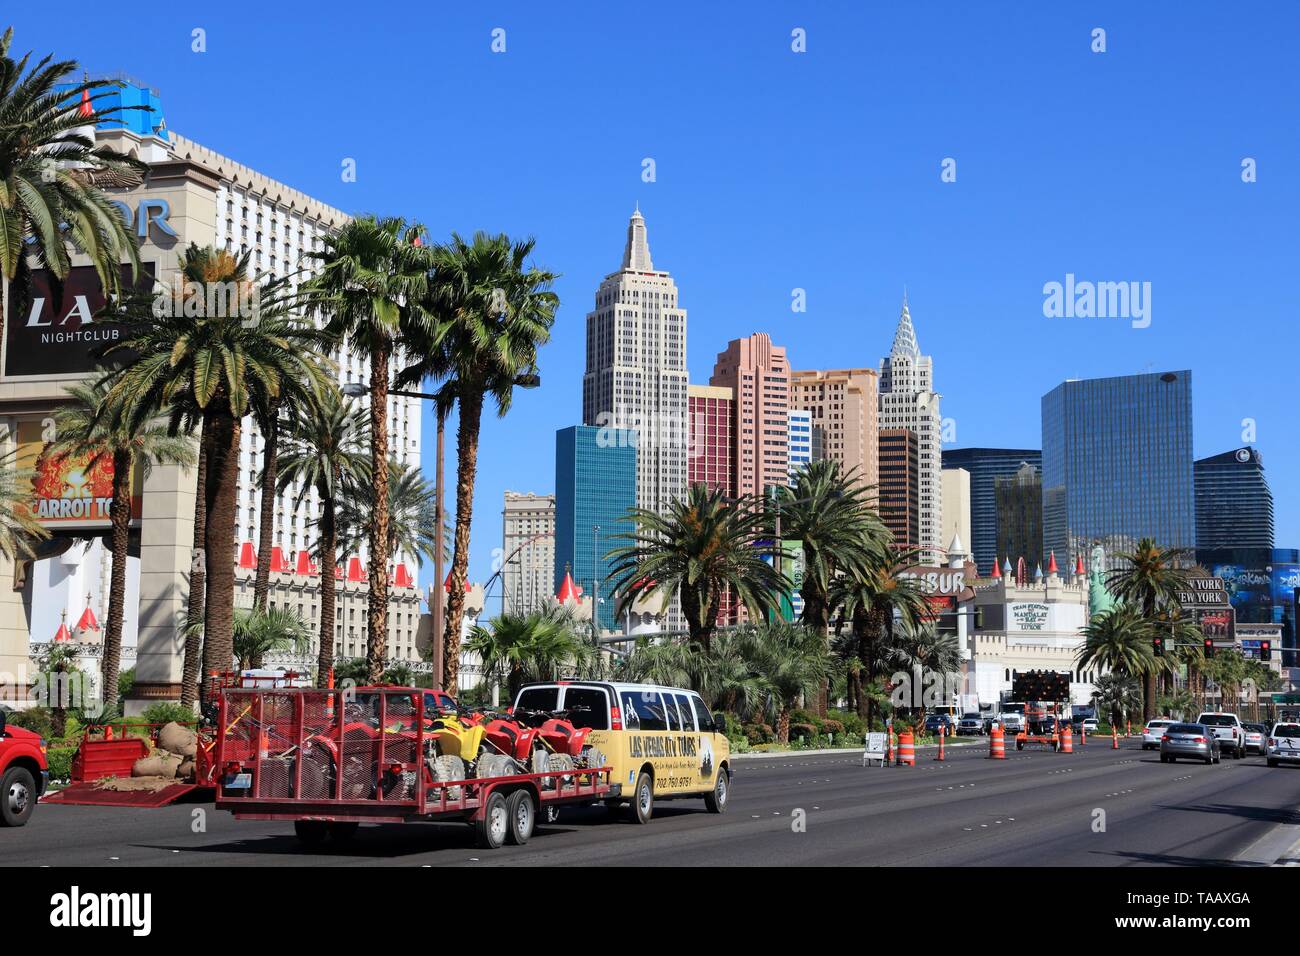 LAS VEGAS, USA - APRIL 14, 2014: Car traffic in Las Vegas, Nevada. Nevada has one of lowest car ownership rates in the USA (500 vehicles per 1000 peop Stock Photo